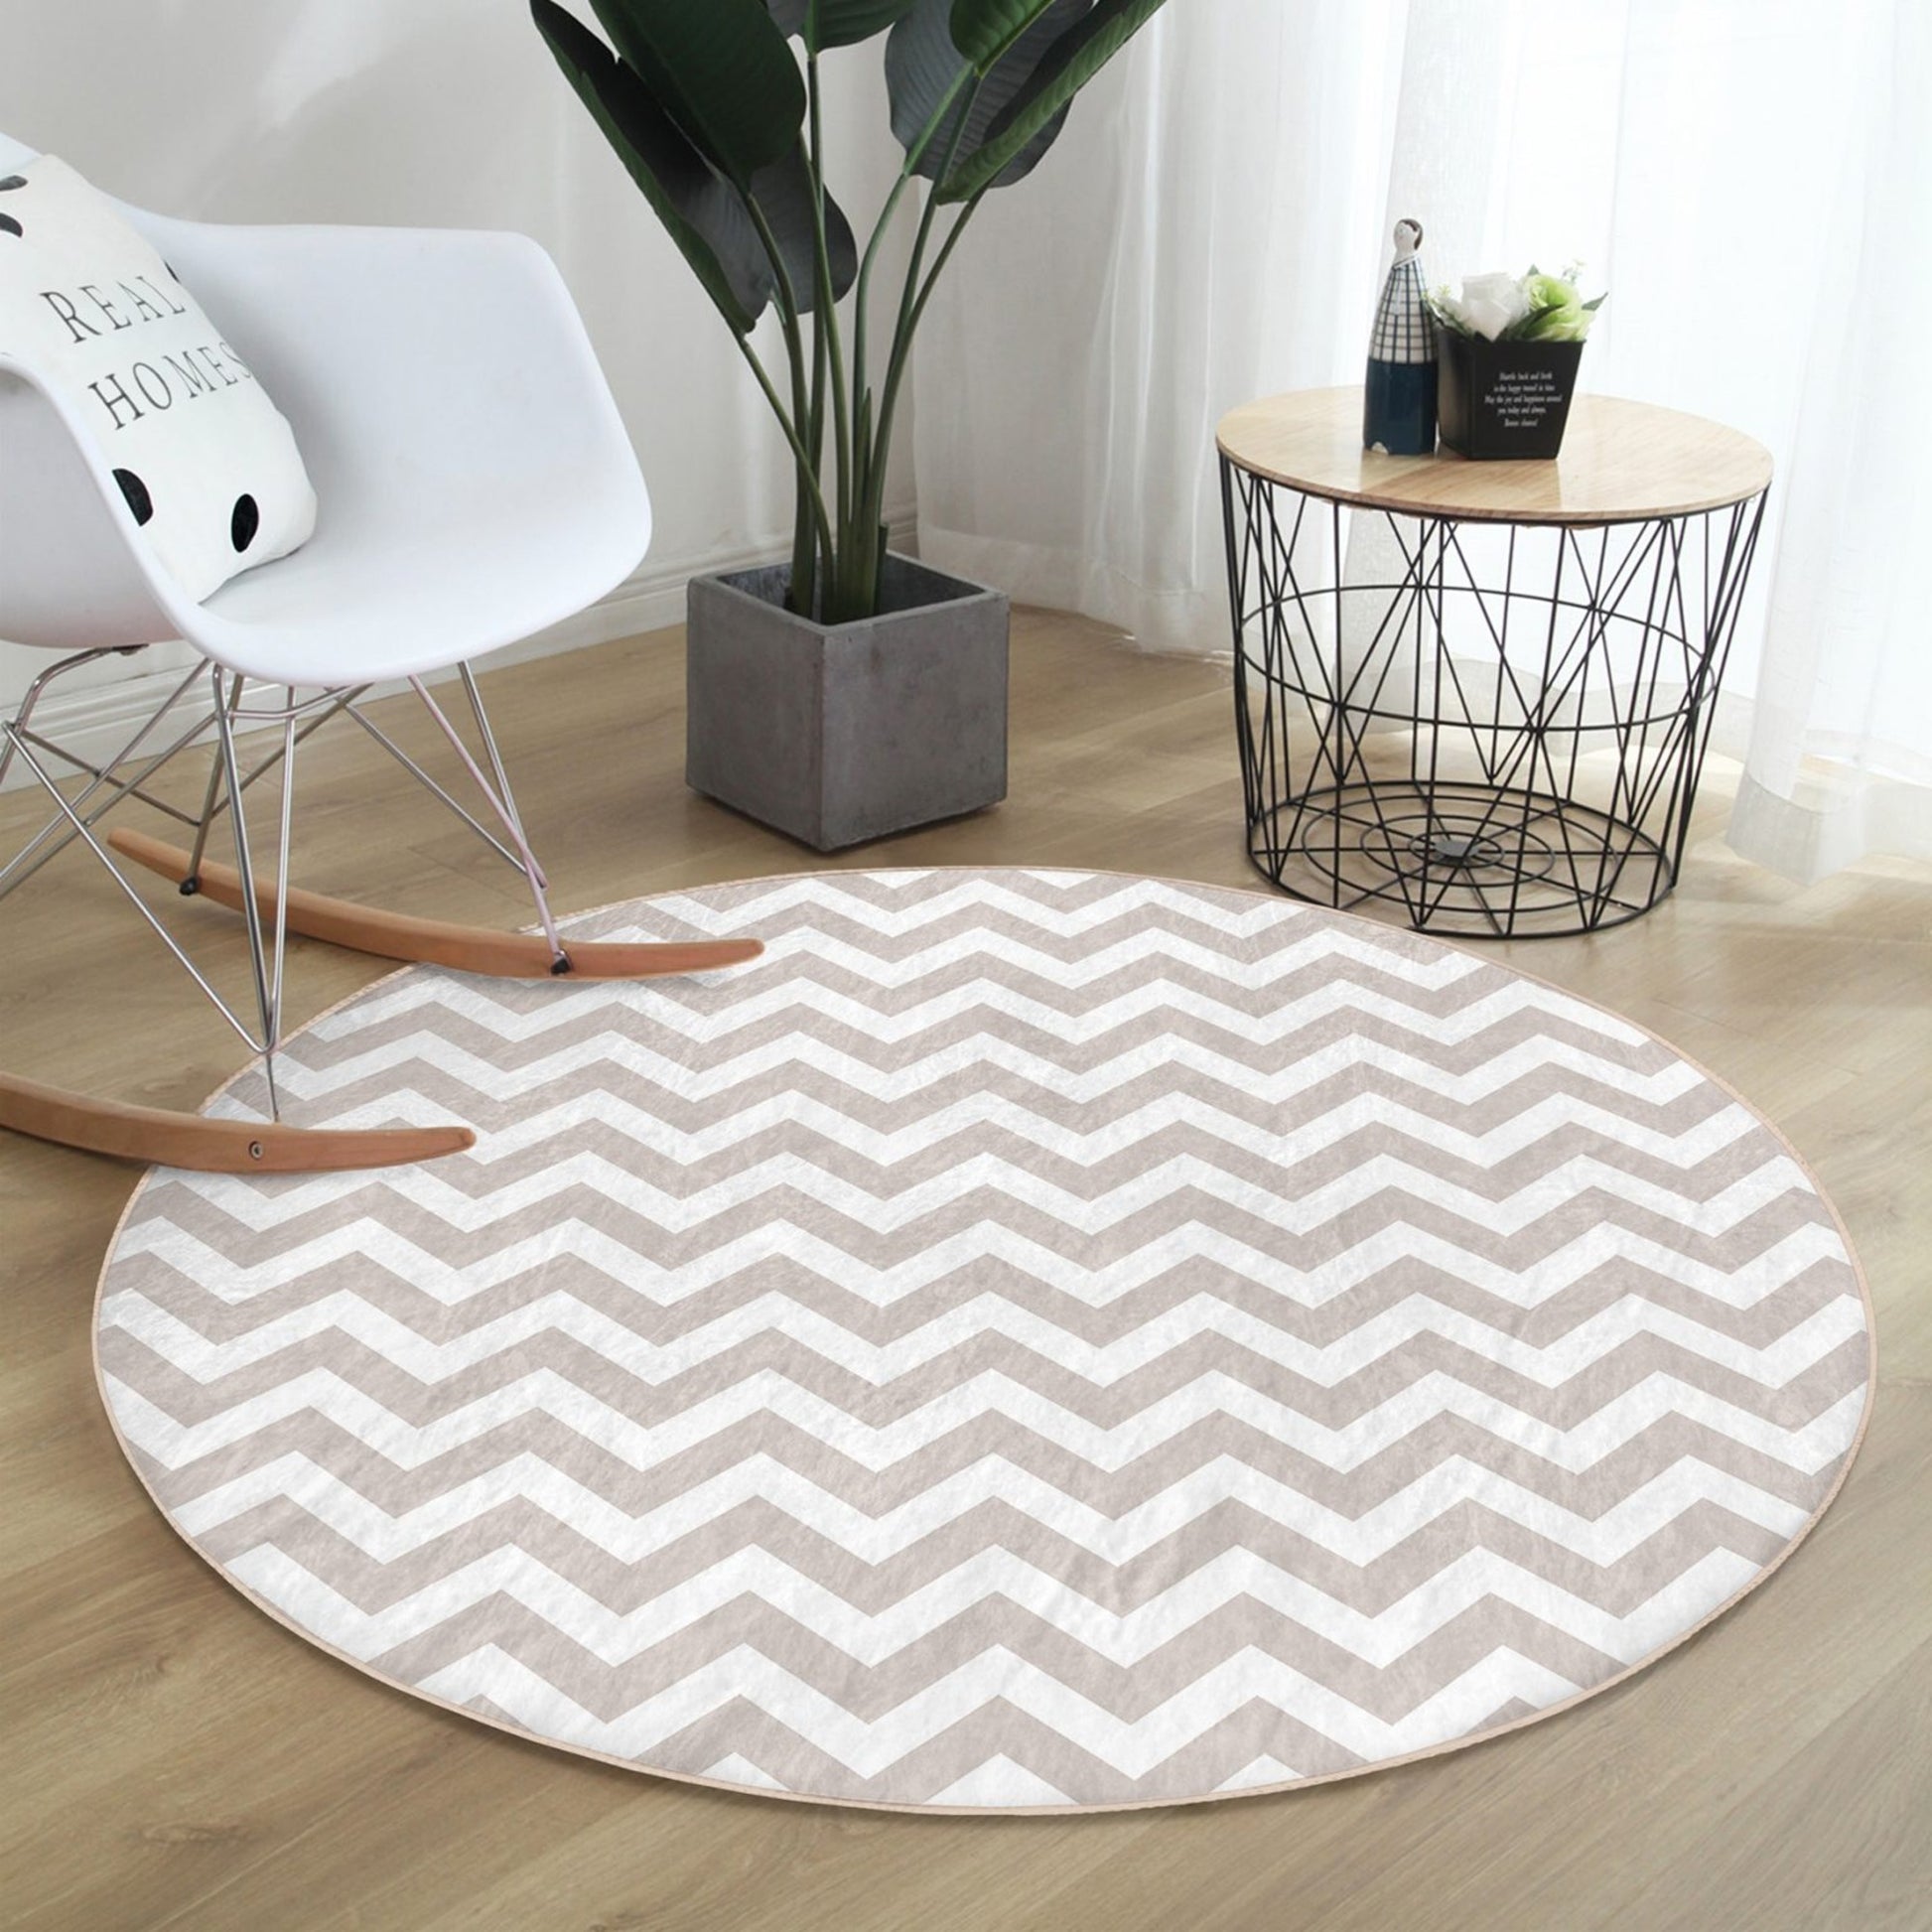 Cozy Ambiance with Bedroom Washable Round Rug